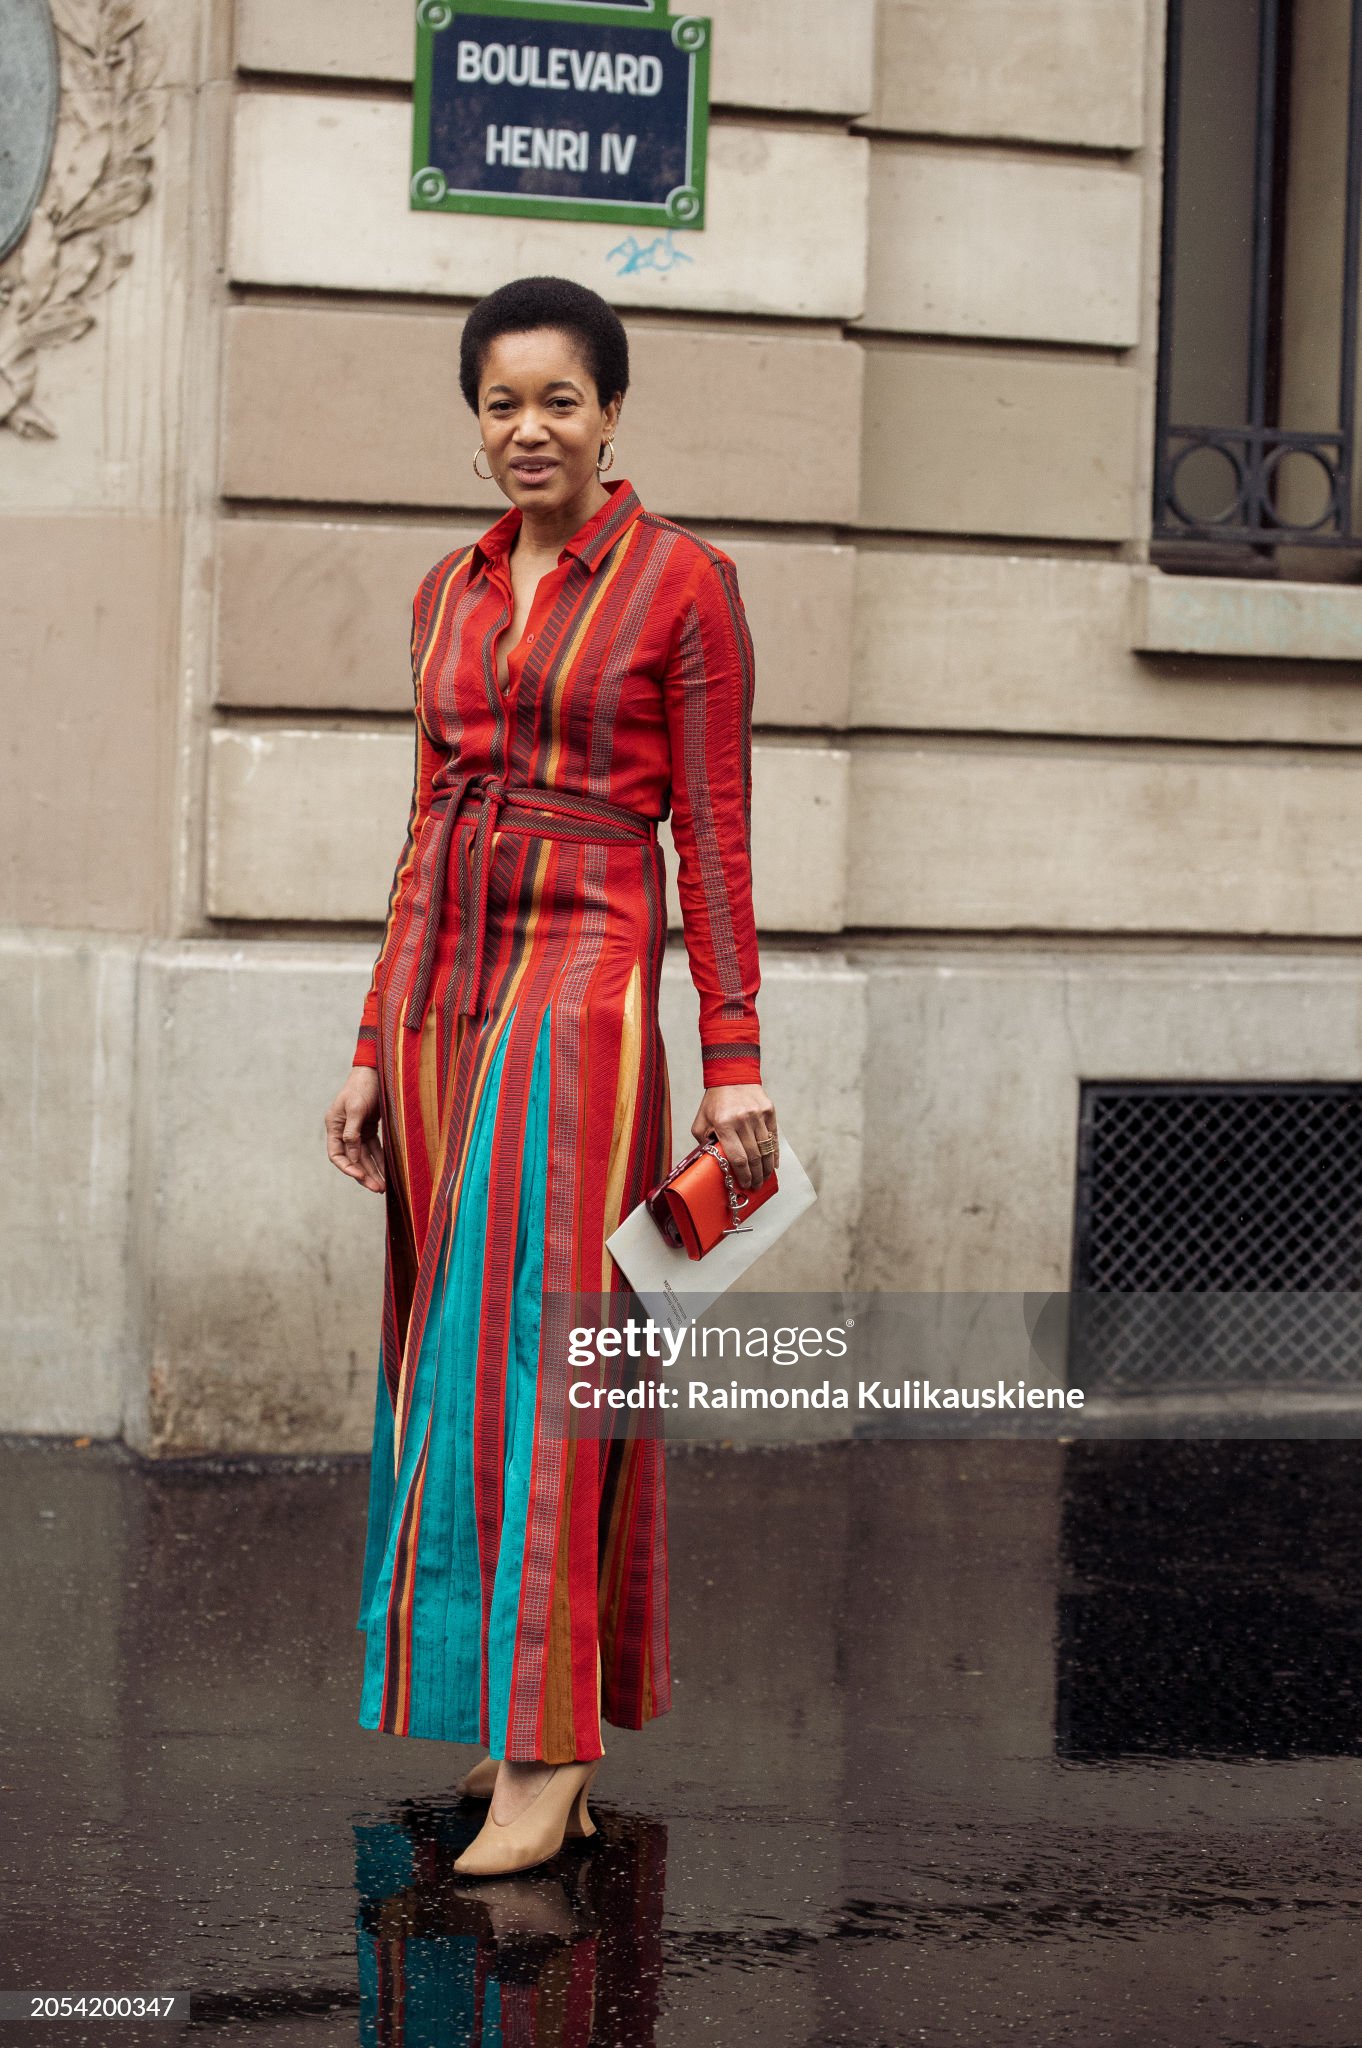 paris-france-tamu-mcpherson-wears-long-red-blue-and-orange-maxi-button-up-dress-with-a-belt.jpg